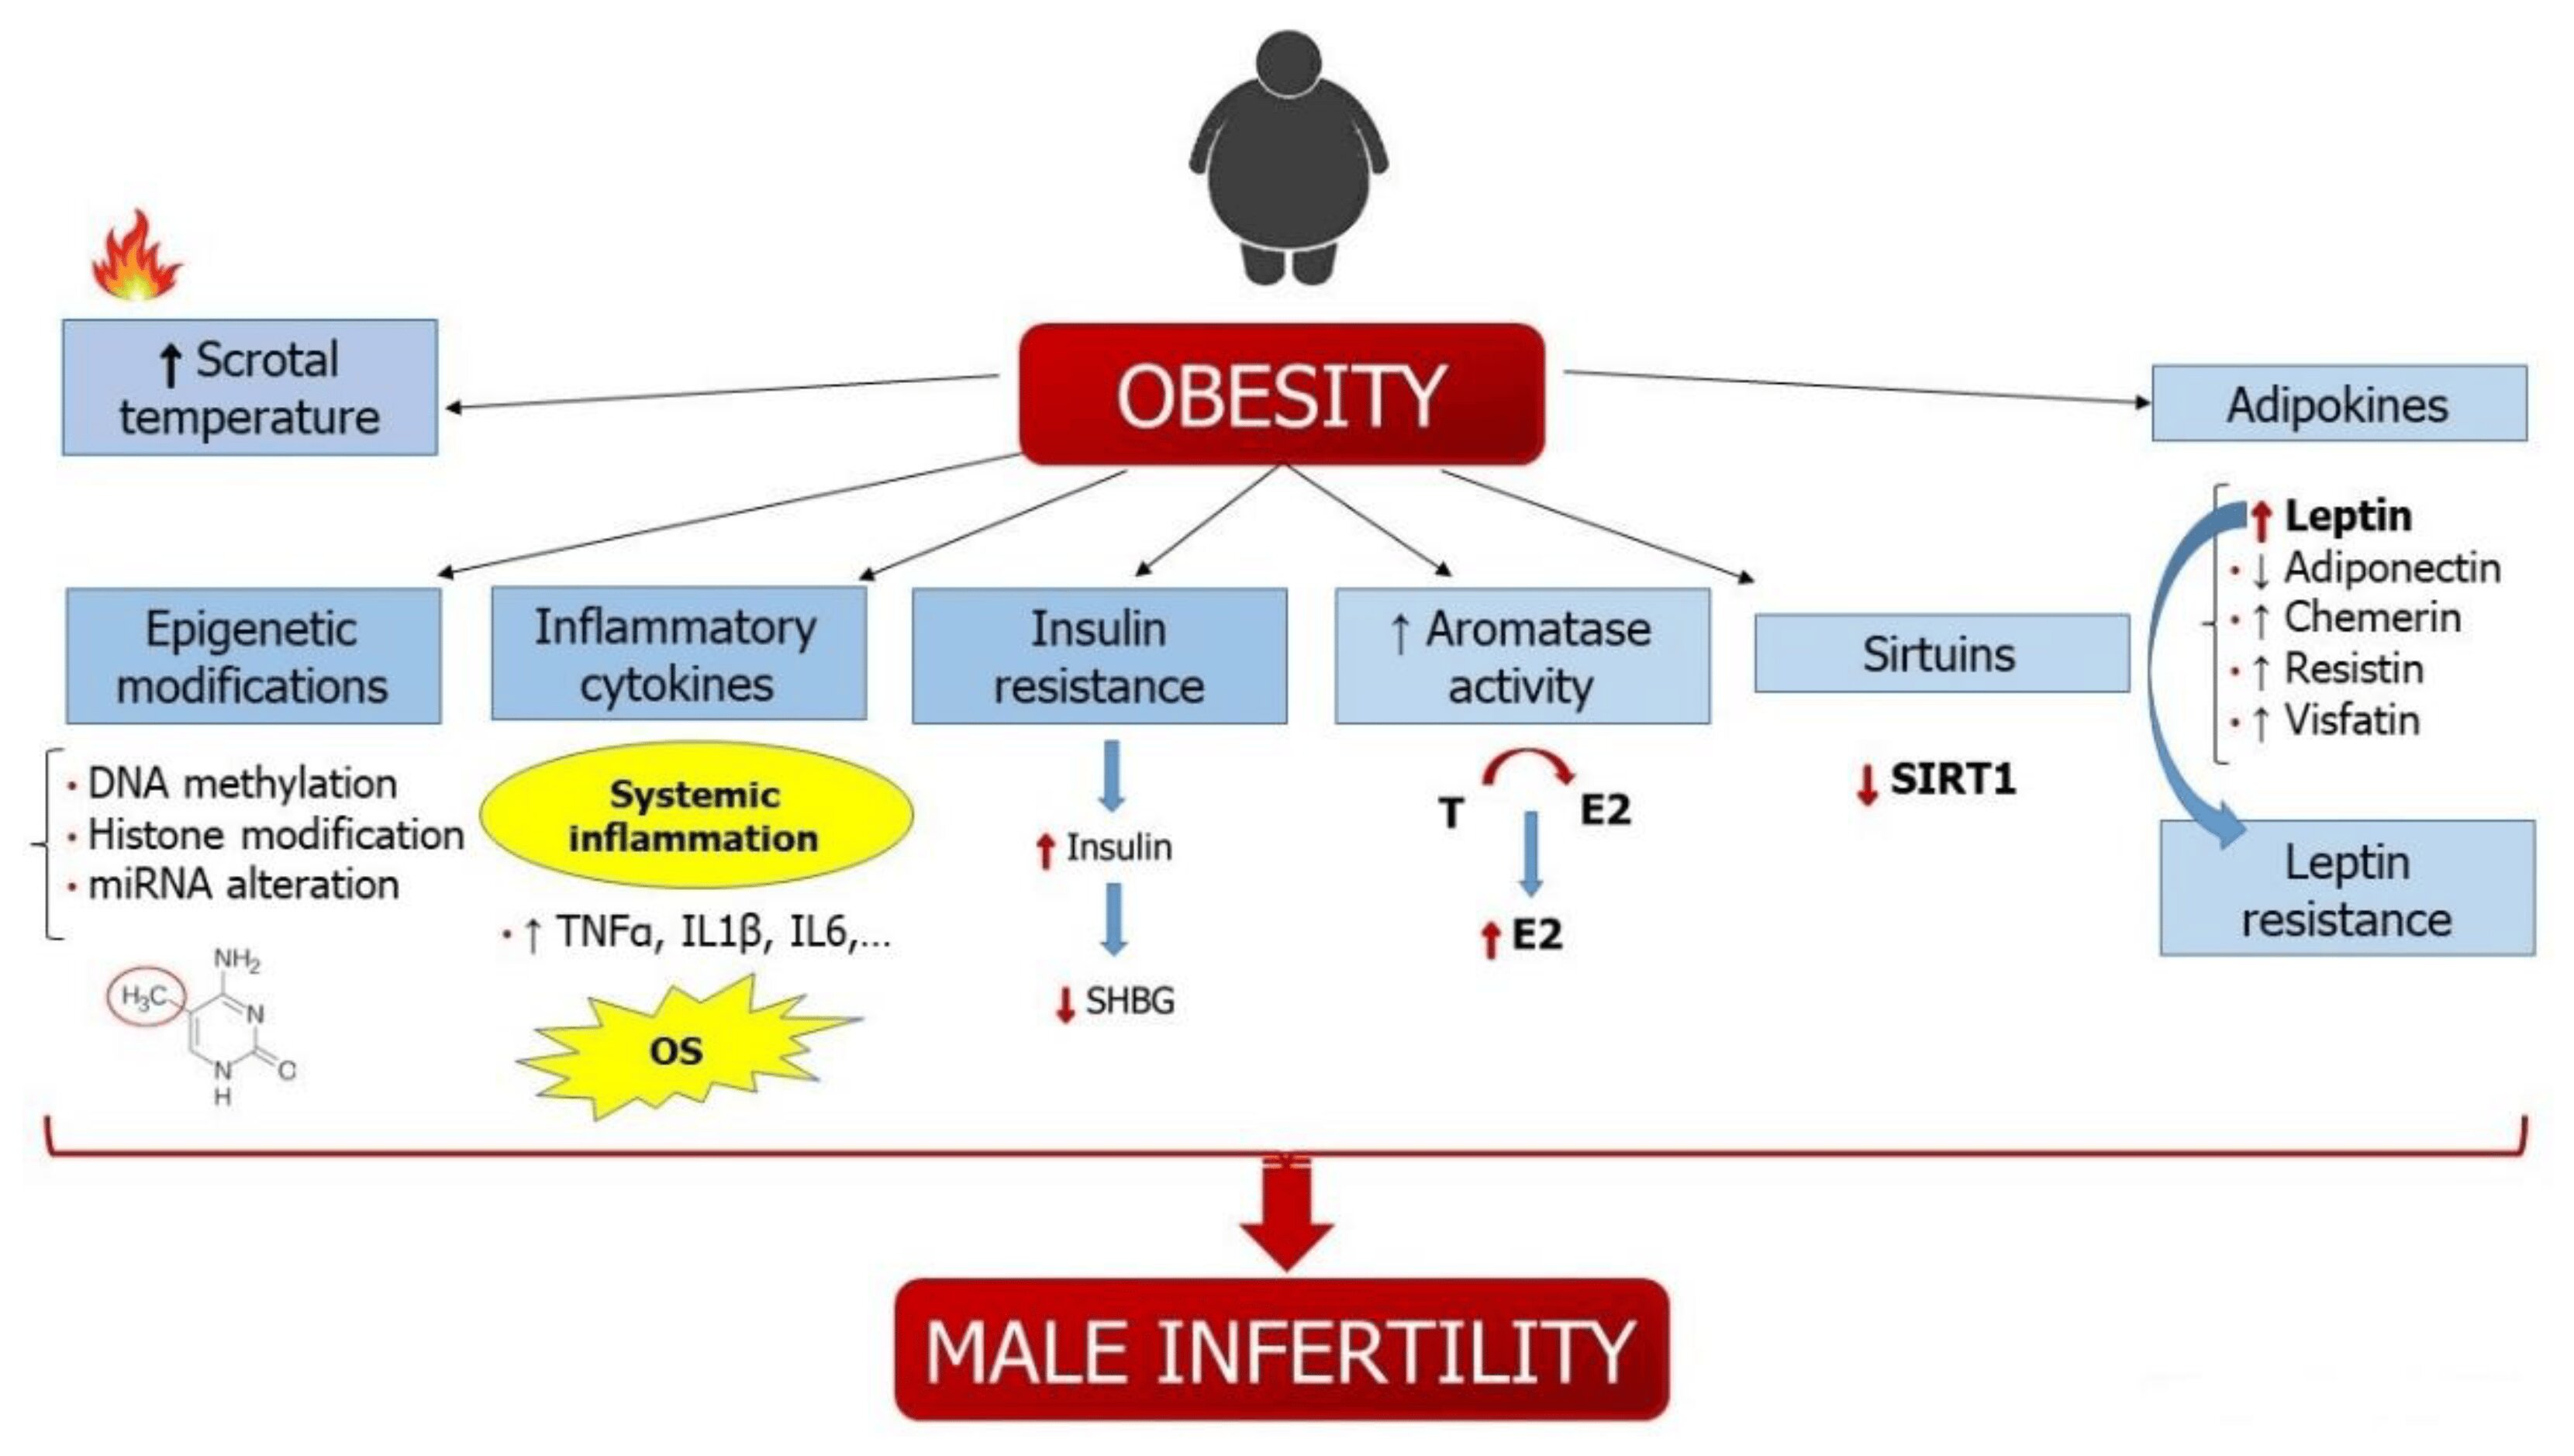 Obesity and male infertility